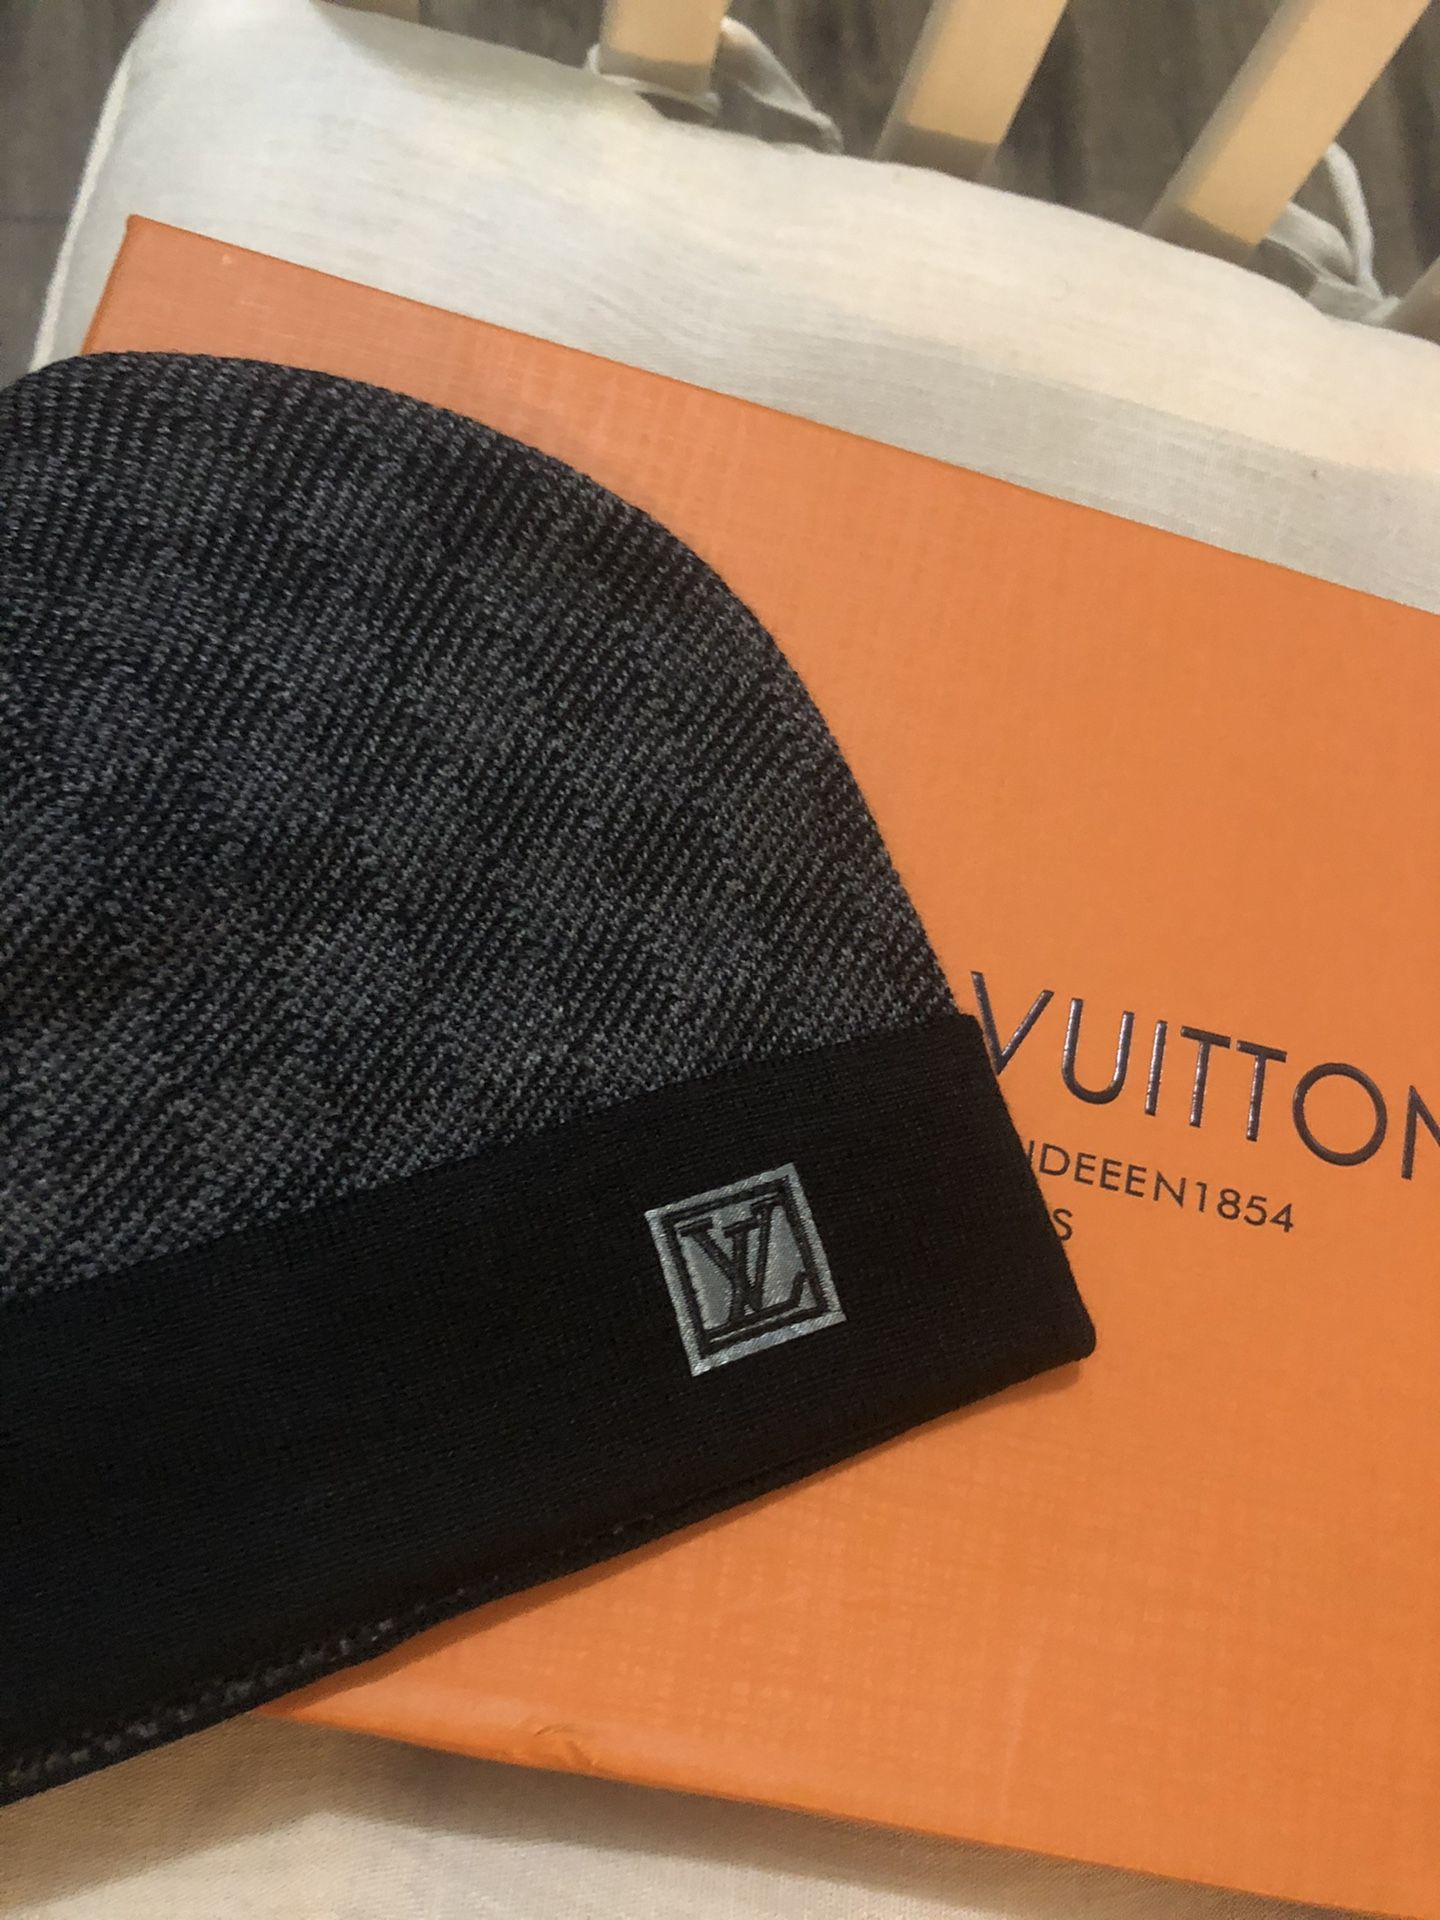 Louis Vuitton Hat for Sale in Sachse, TX - OfferUp